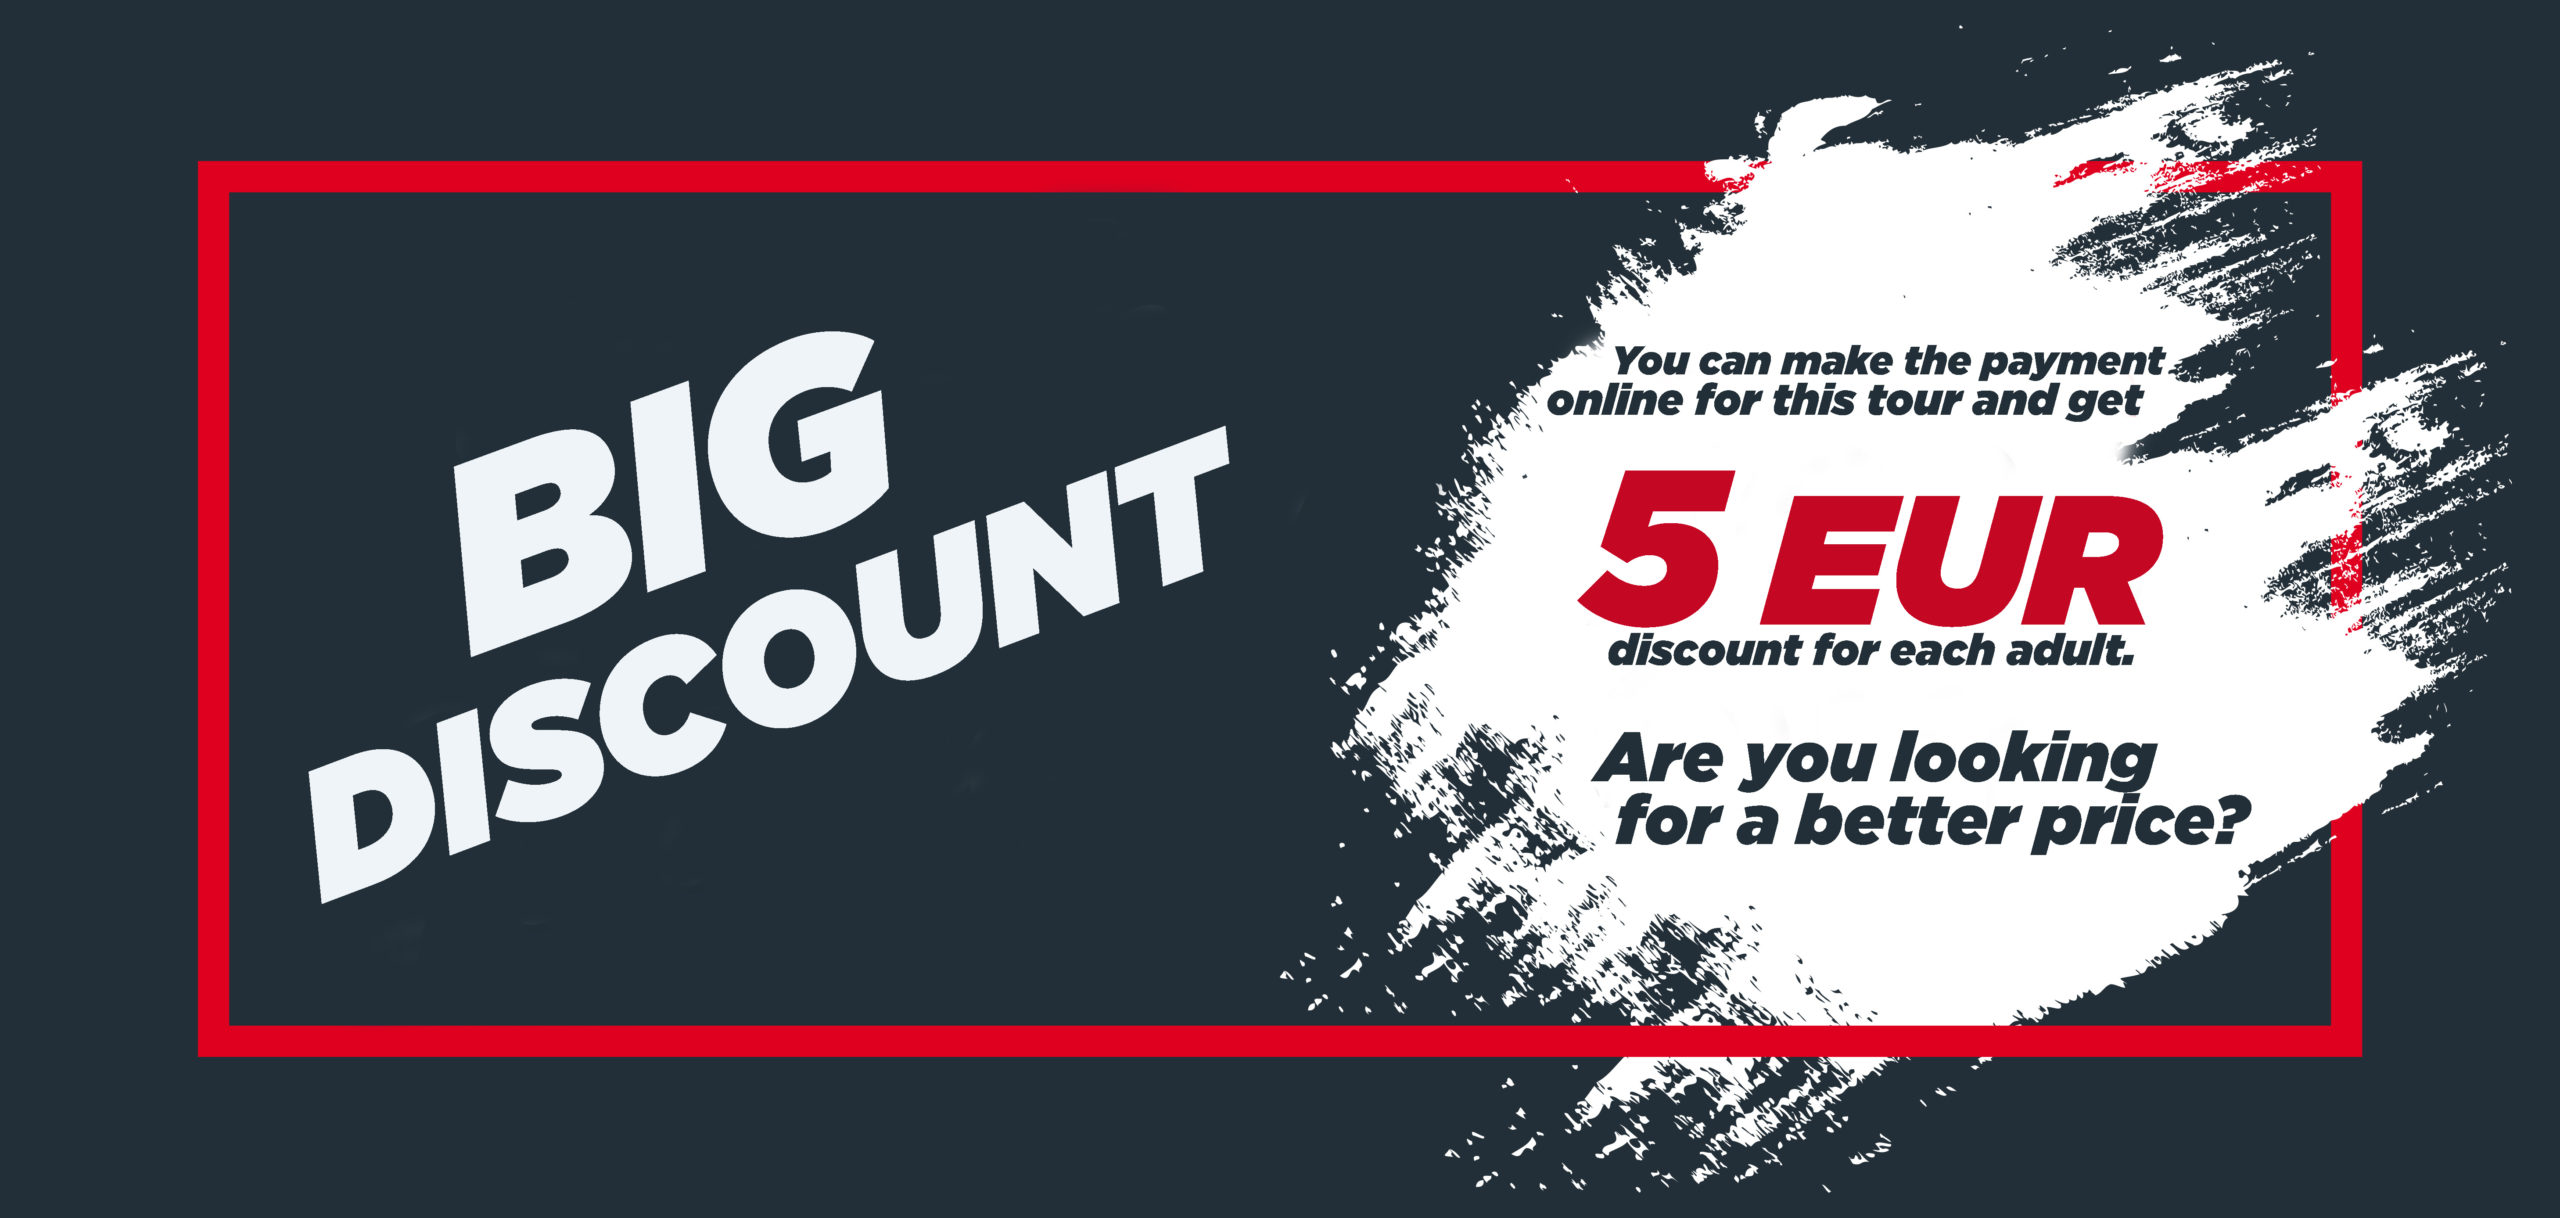 DİSCOUNT OFFER